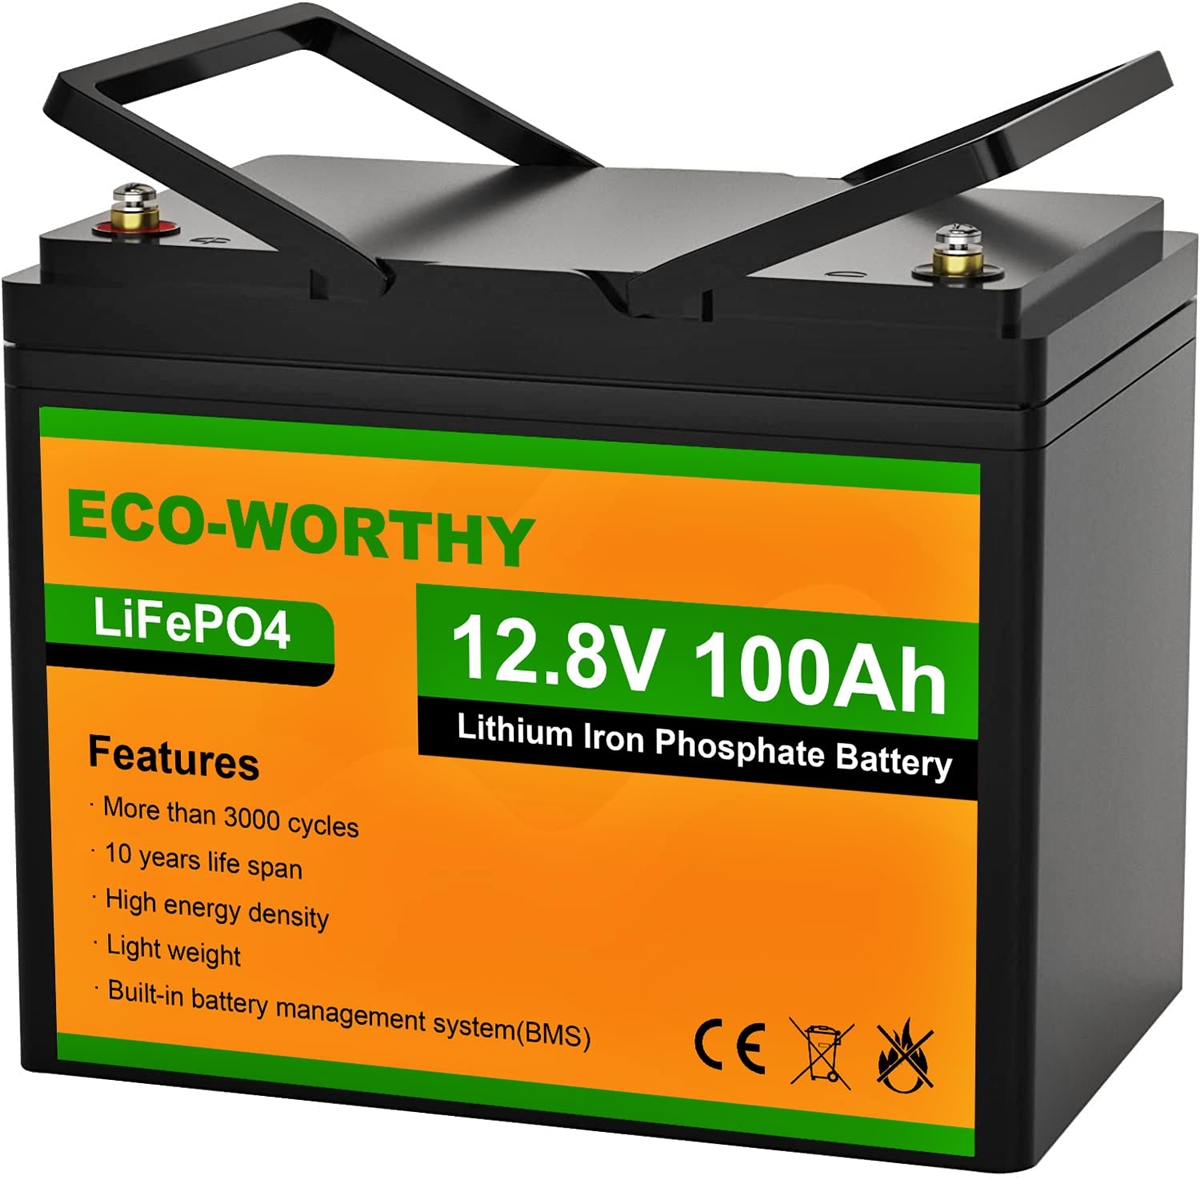 What is a Lithium Iron Phosphate Battery (LFP Battery)? CellularNews